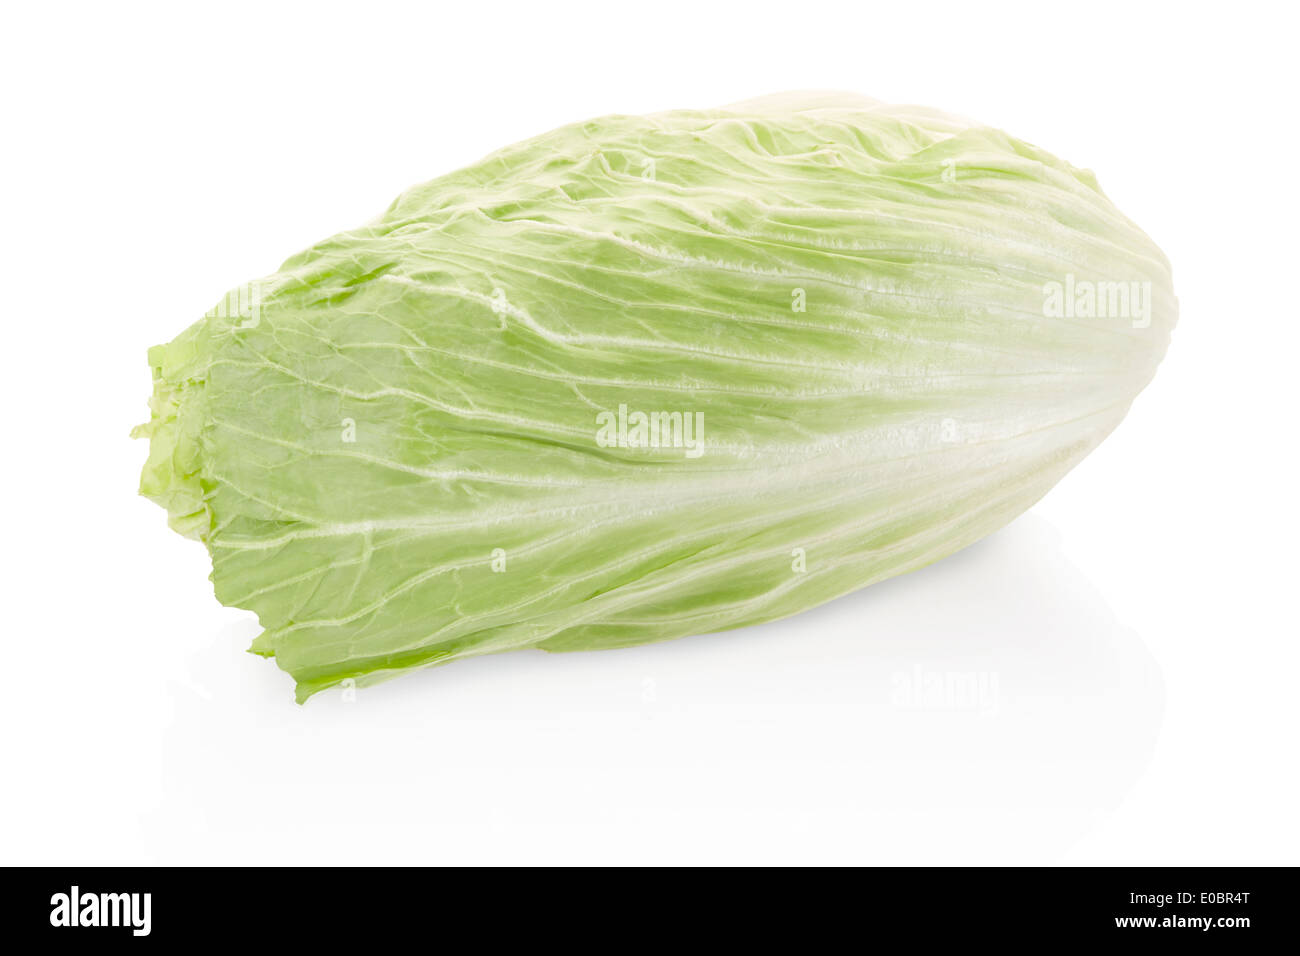 Green long cabbage Stock Photo